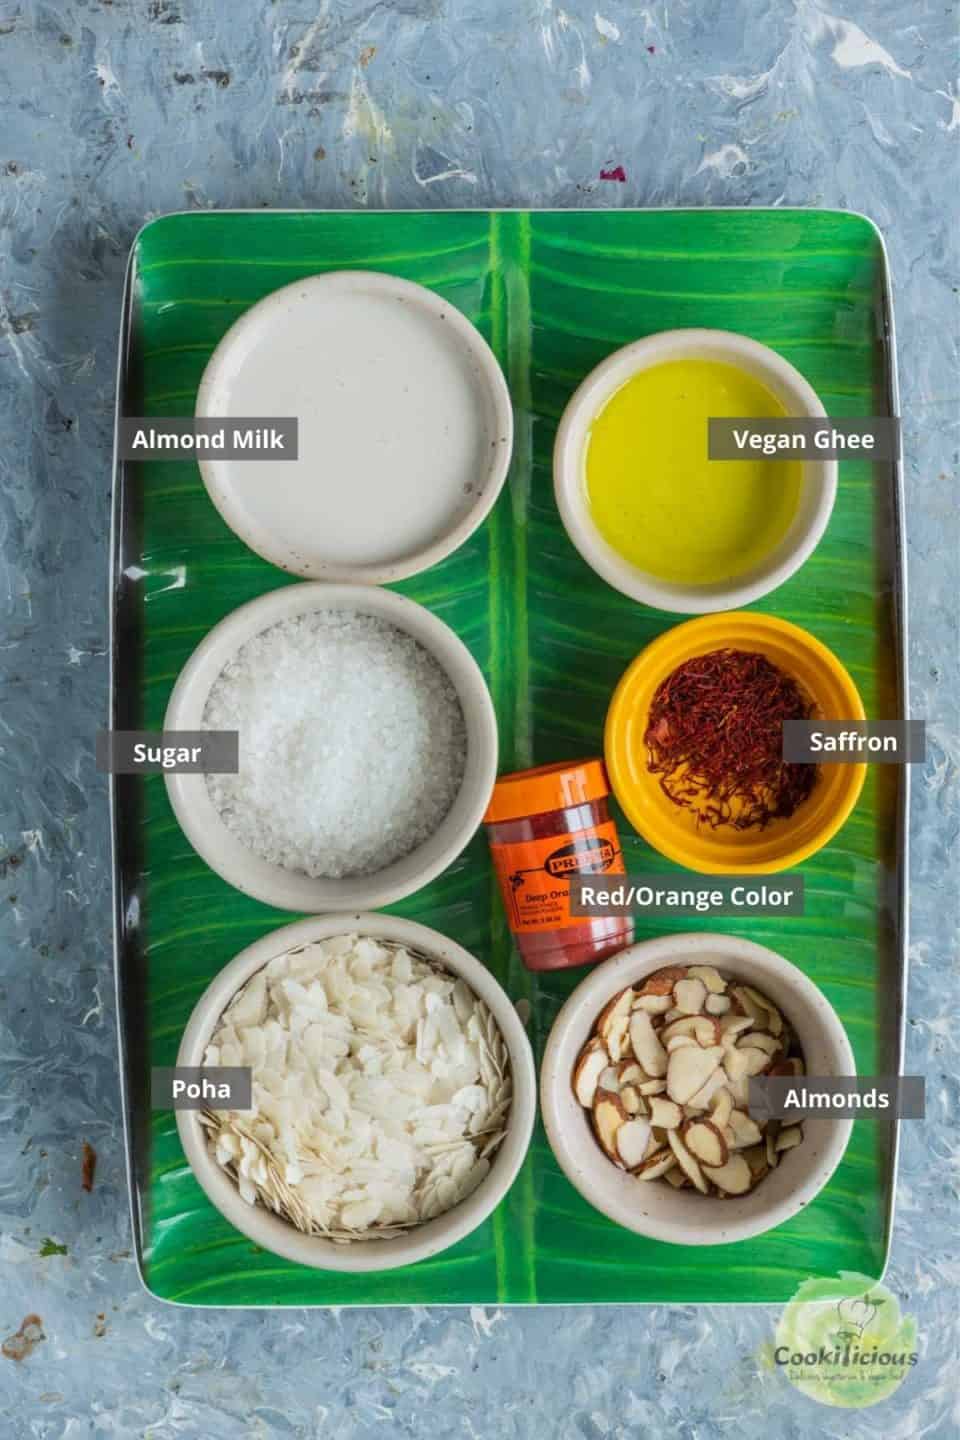 all the ingredients needed to make aval kesari placed on a tray with labels on them